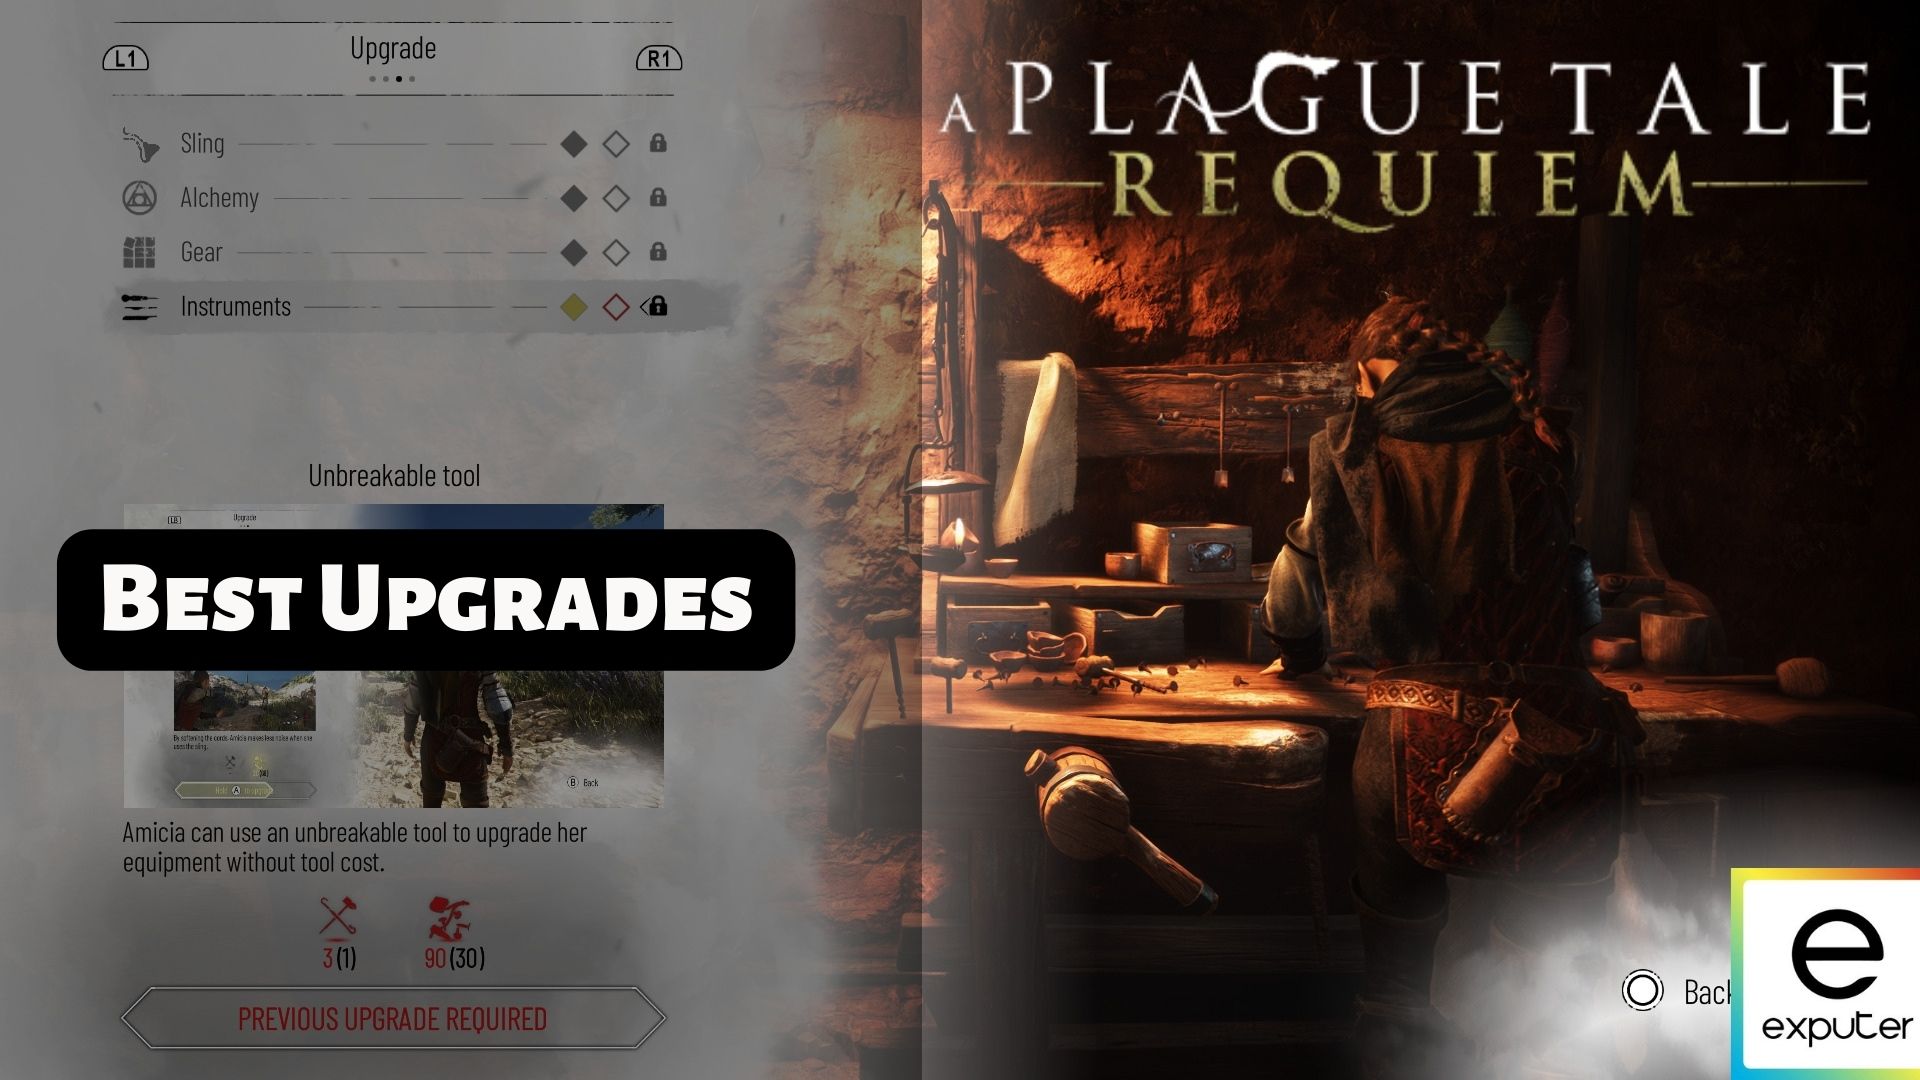 A Plague Tale Requiem best upgrades for your weapons, tools